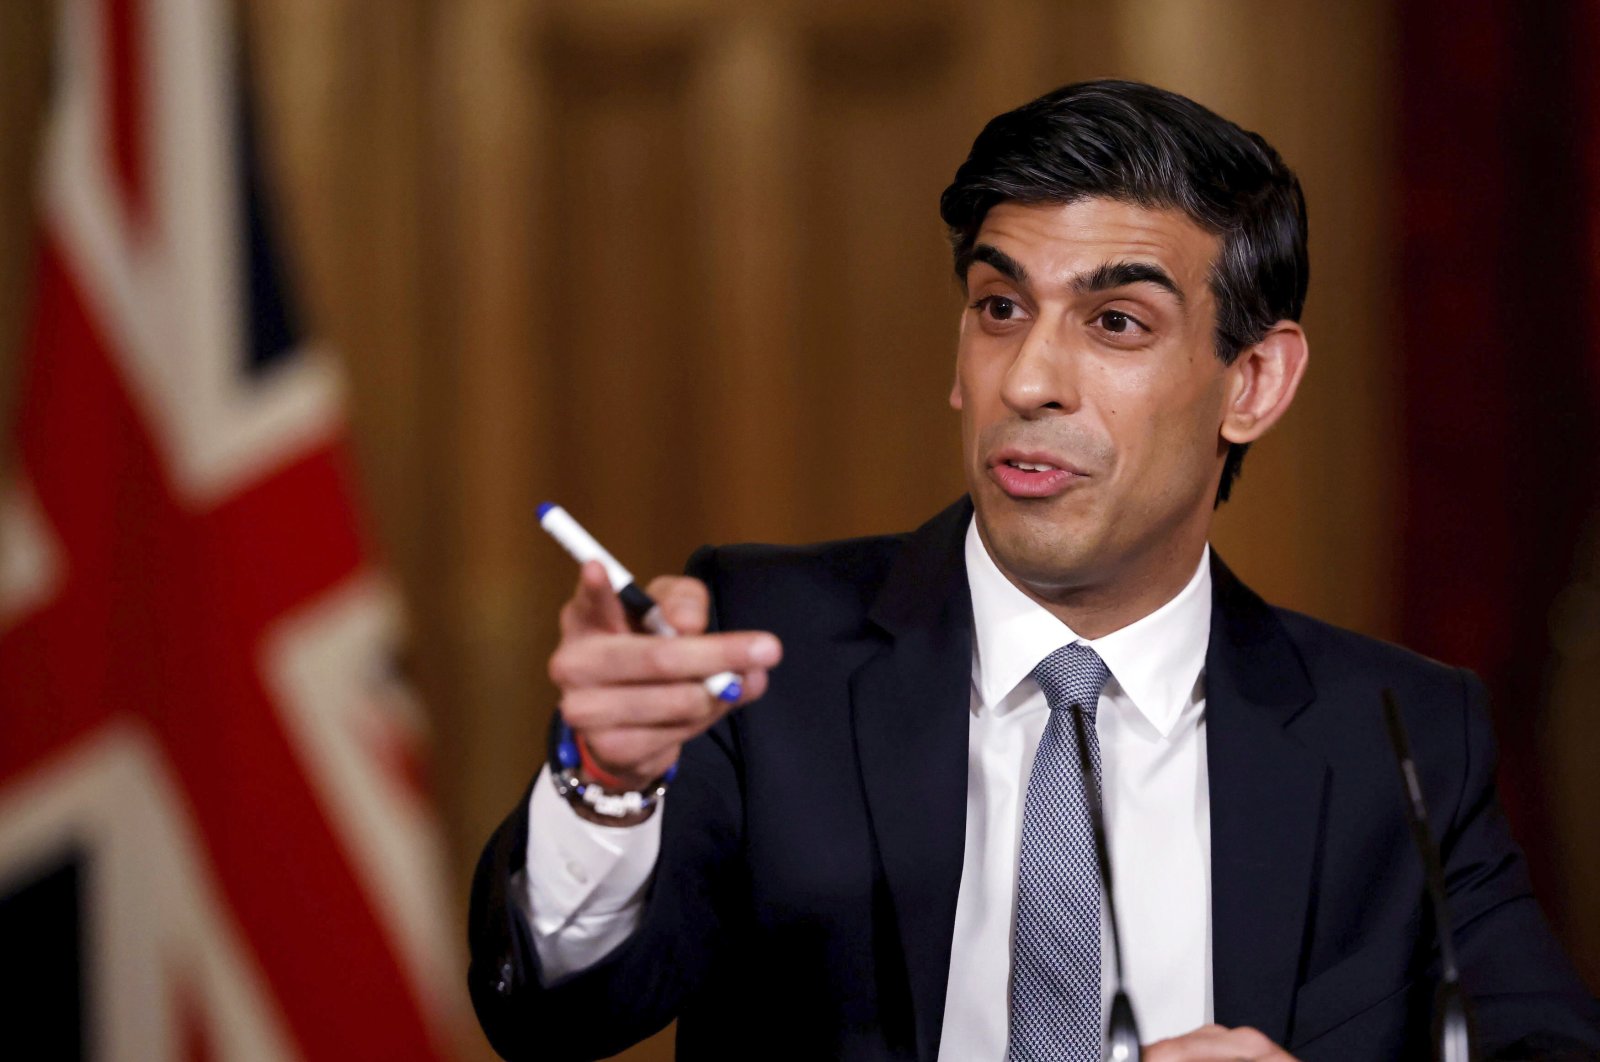 Britain's Chancellor of the Exchequer Rishi Sunak speaks during a press conference following the 2021 Budget, in 10 Downing Street, London, U.K., March 3, 2021. (AP Photo)